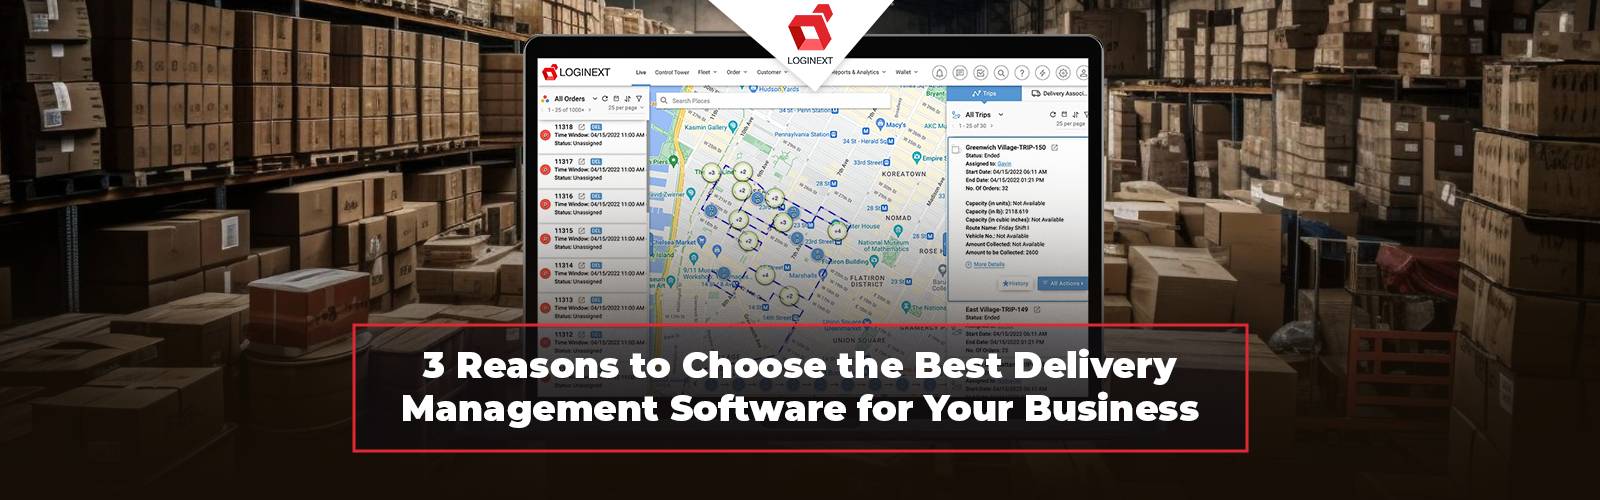 Best Delivery Management Software for CPG Industry